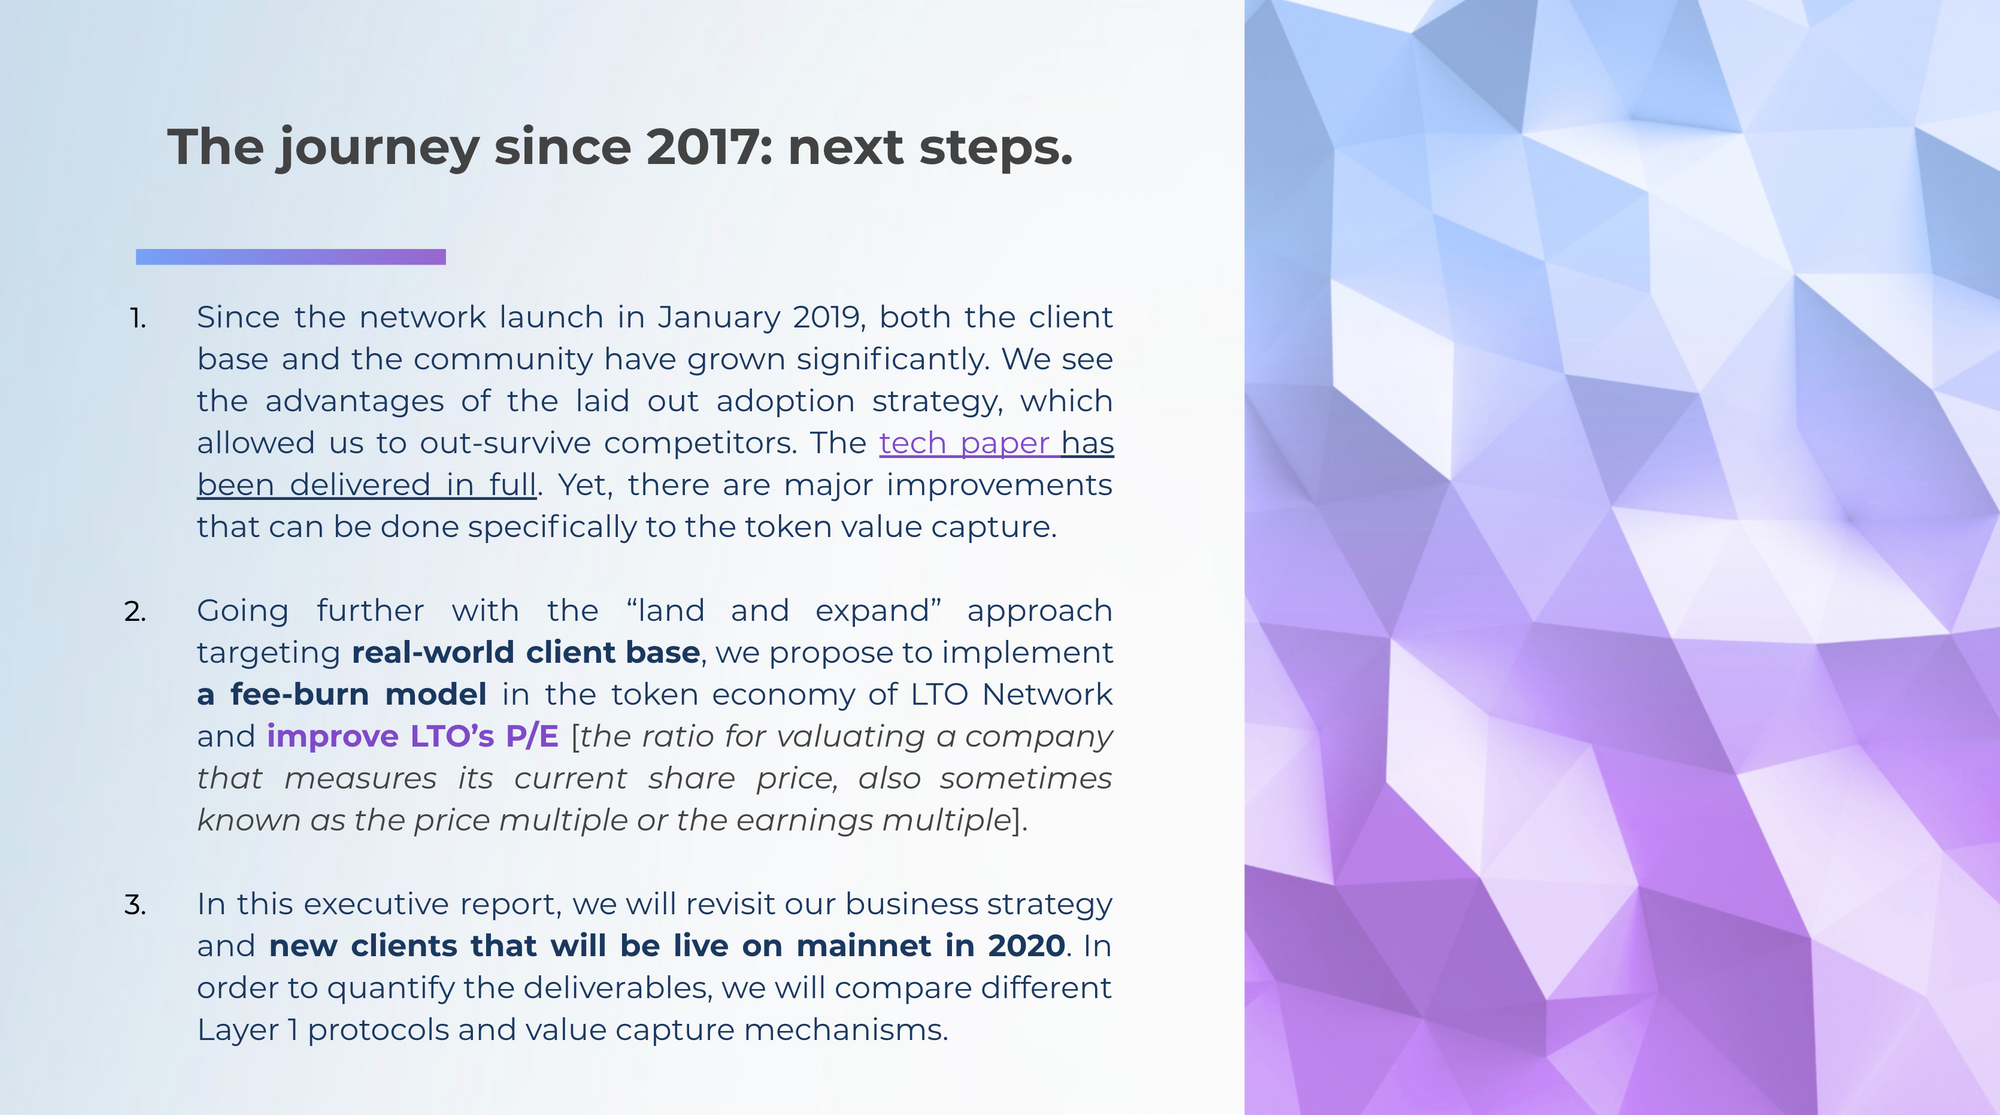 We have come a long way with the community since 2017, and have built out the tech stack which has been validated by multiple integrators. However, this is just the start for adoption!